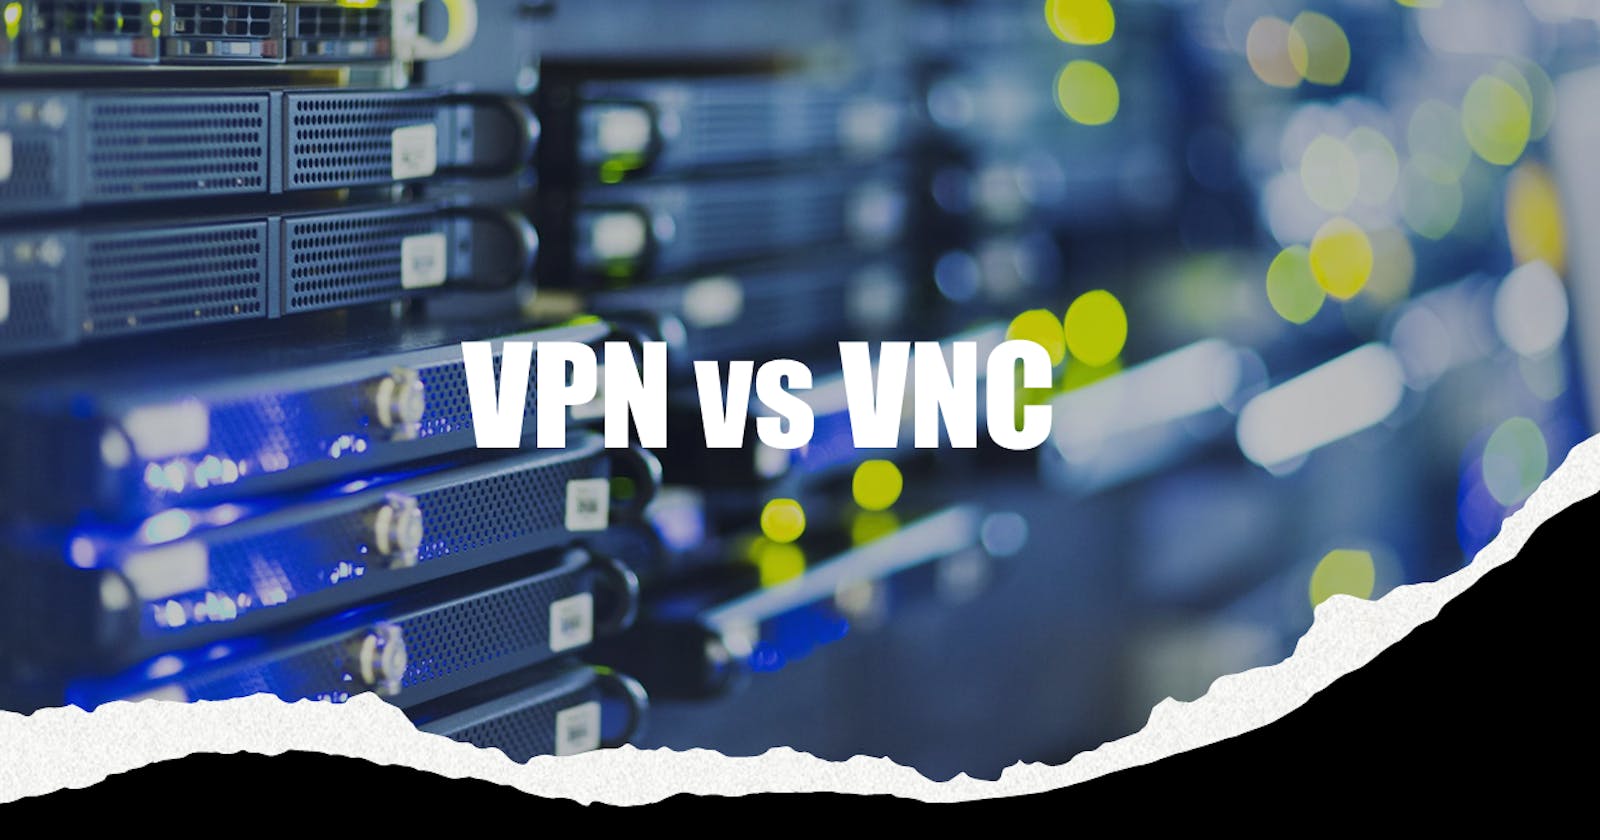 VPN vs. VNC - Which One is Safer & Faster?